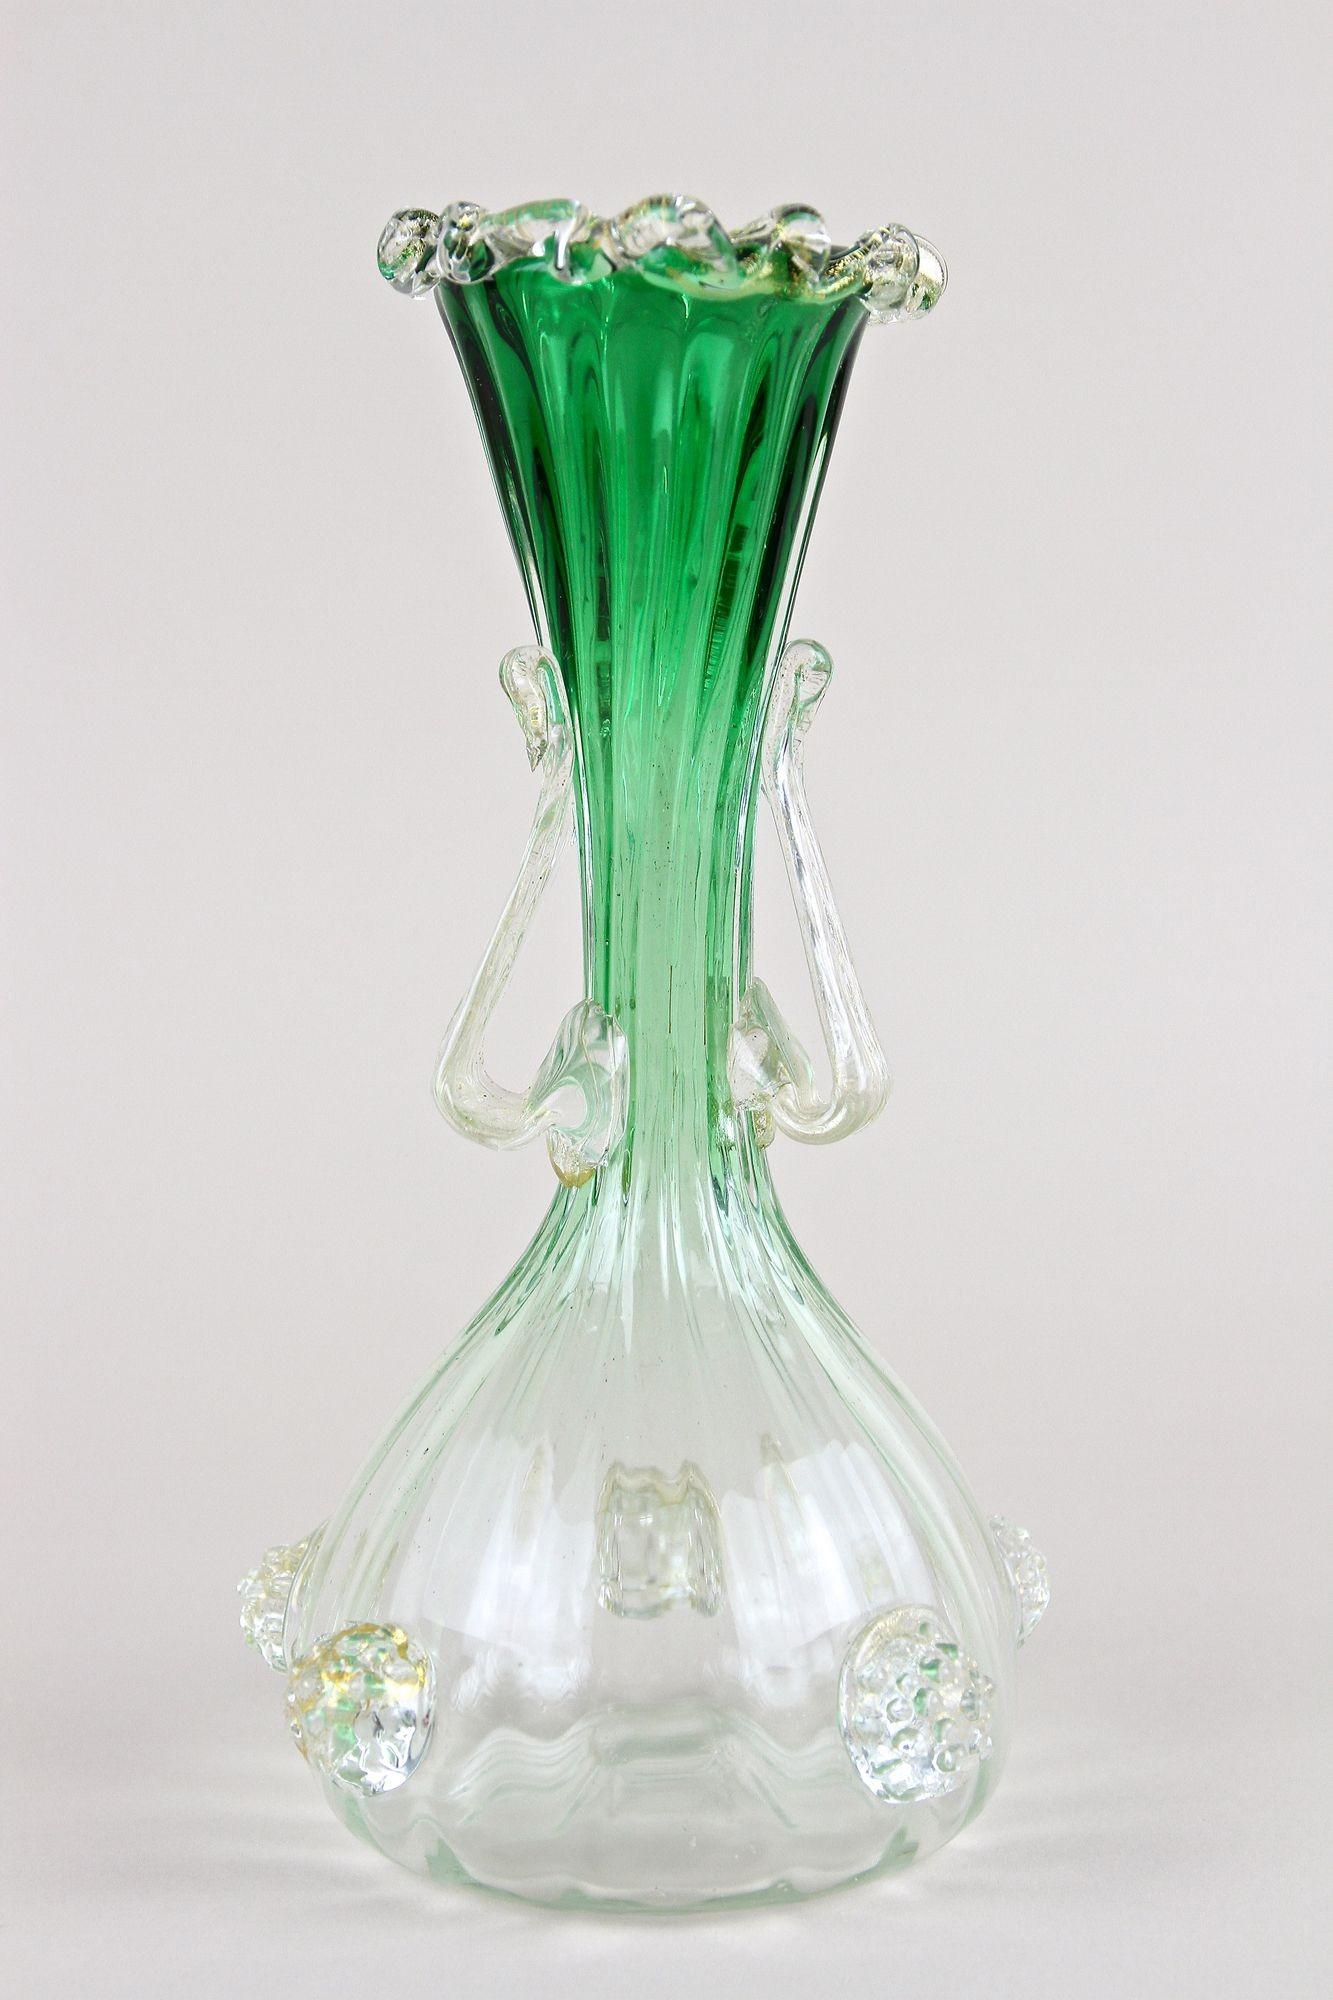 Hand-Crafted Green/ White Murano Glass Vase With 24k Gold Flakes by Fratelli Toso, IT ca 1930 For Sale